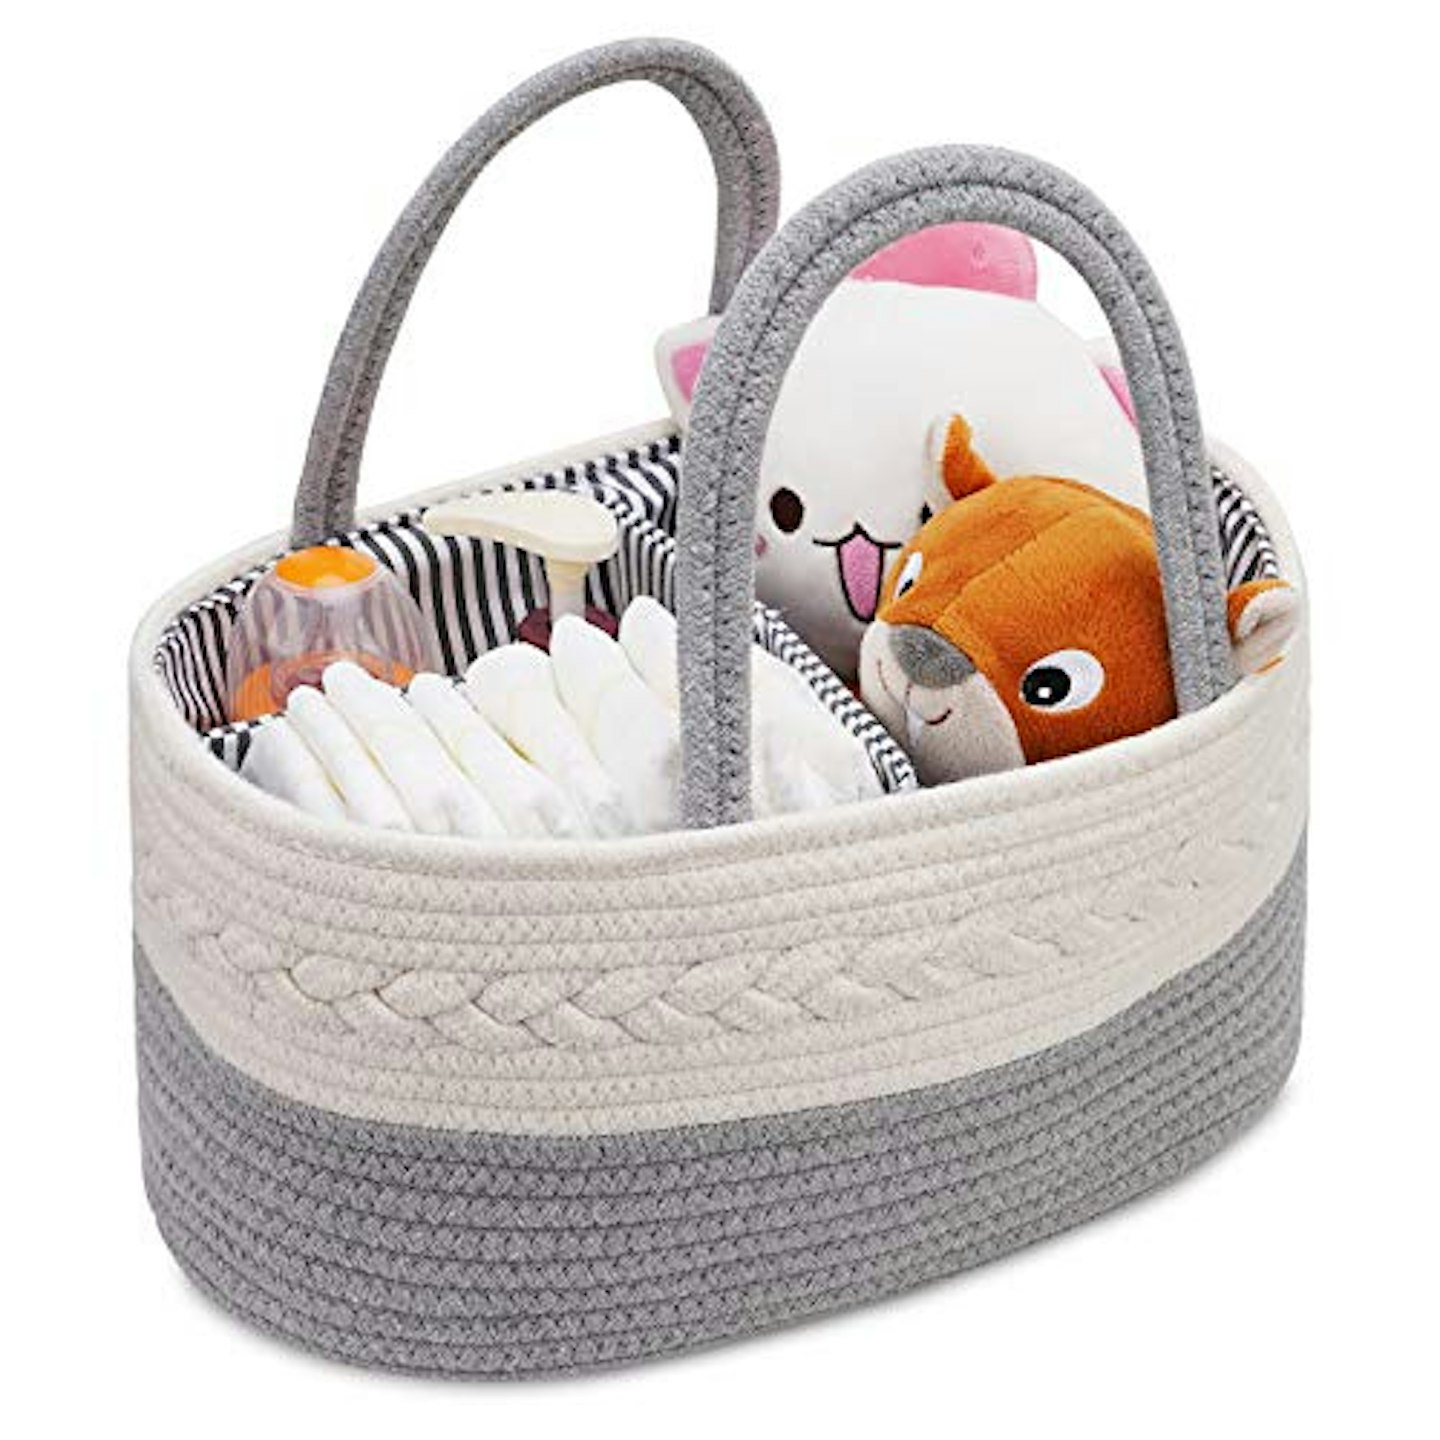 Cotton Rope Baby Nappy Storage Basket - nappy organisers